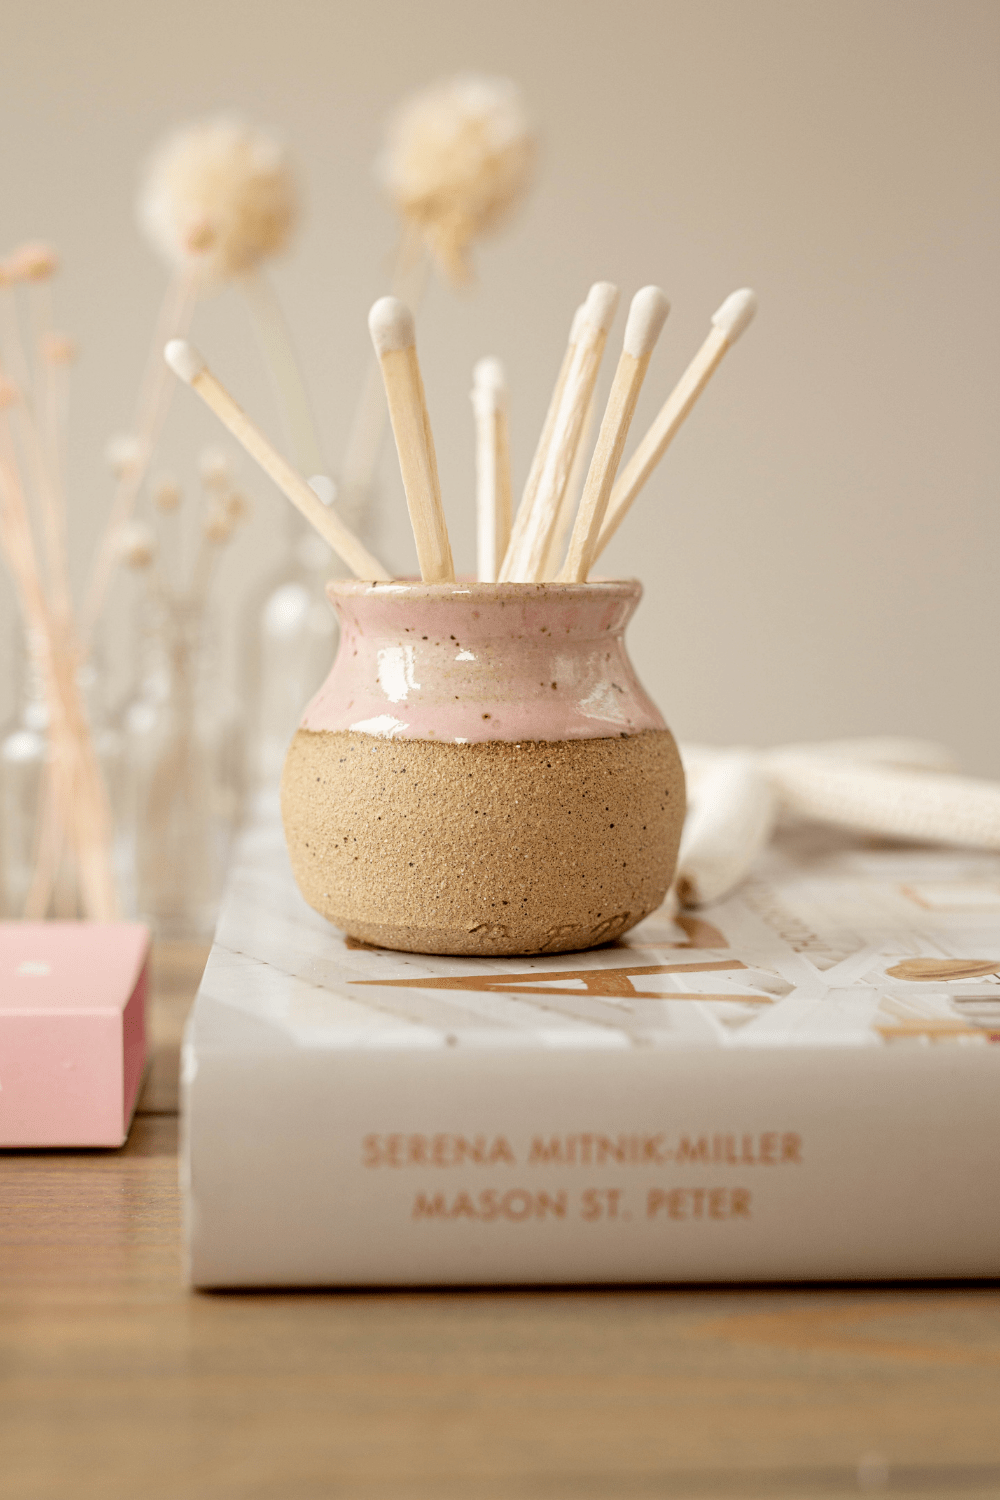 Pink Match Striker - Handmade Two Toned Strike Mini Pottery - Luxe B Pampas Grass  Canada , ships via Canada Post from Edmonton 